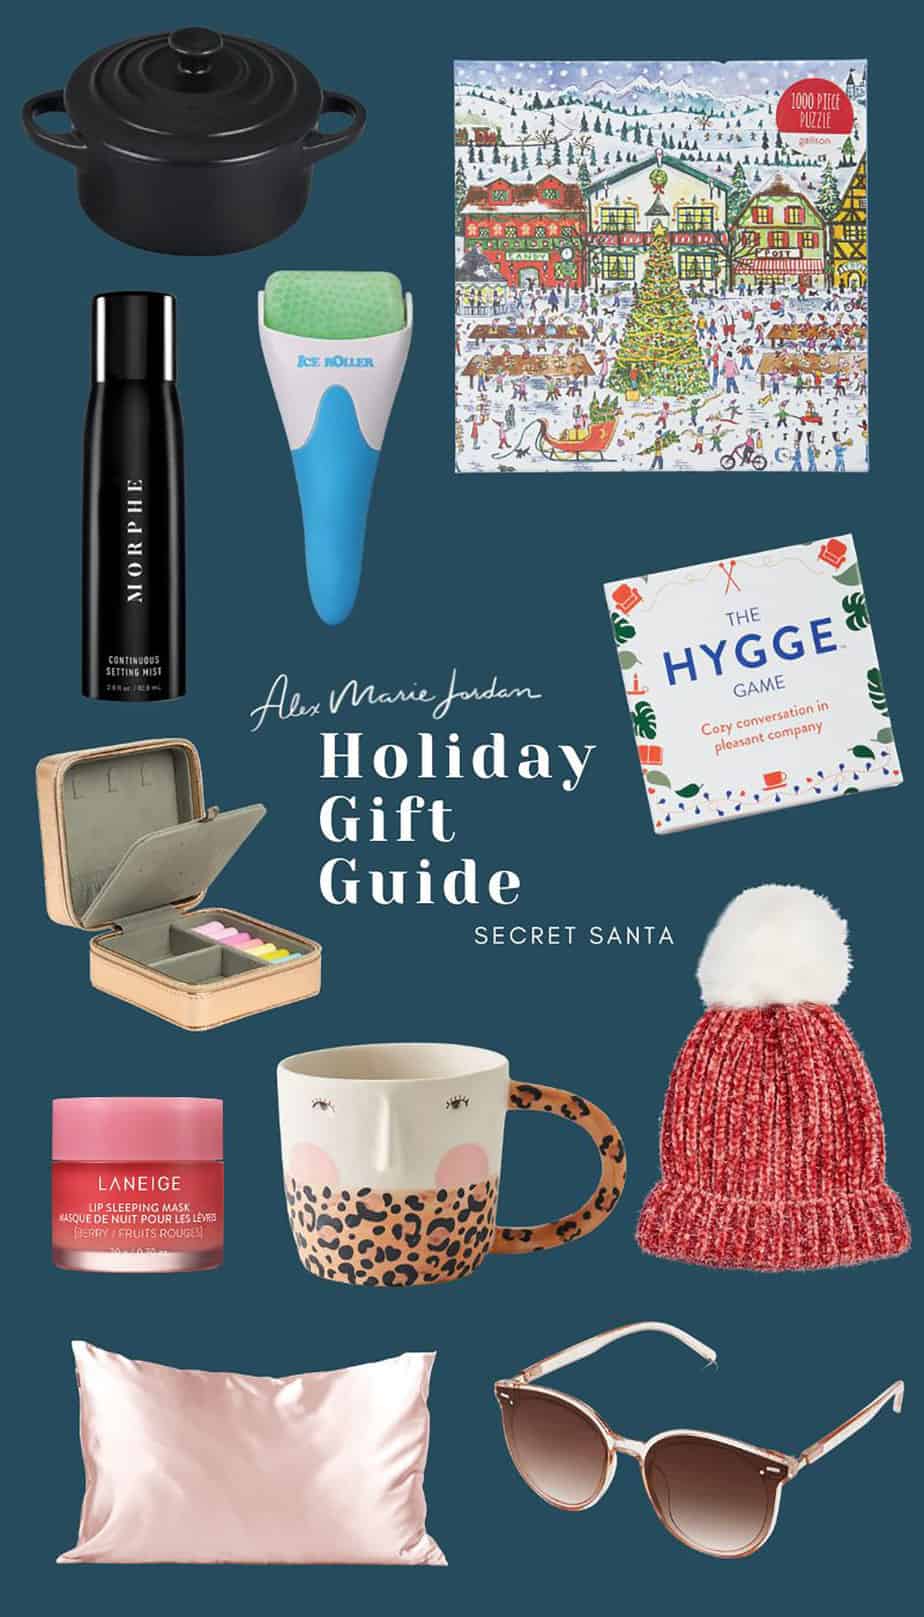 secret santa gift guide with makeup and beauty items, holiday puzzle, group game, fuzzy hat, sunglasses, silk pillowcase, and coffee mug.